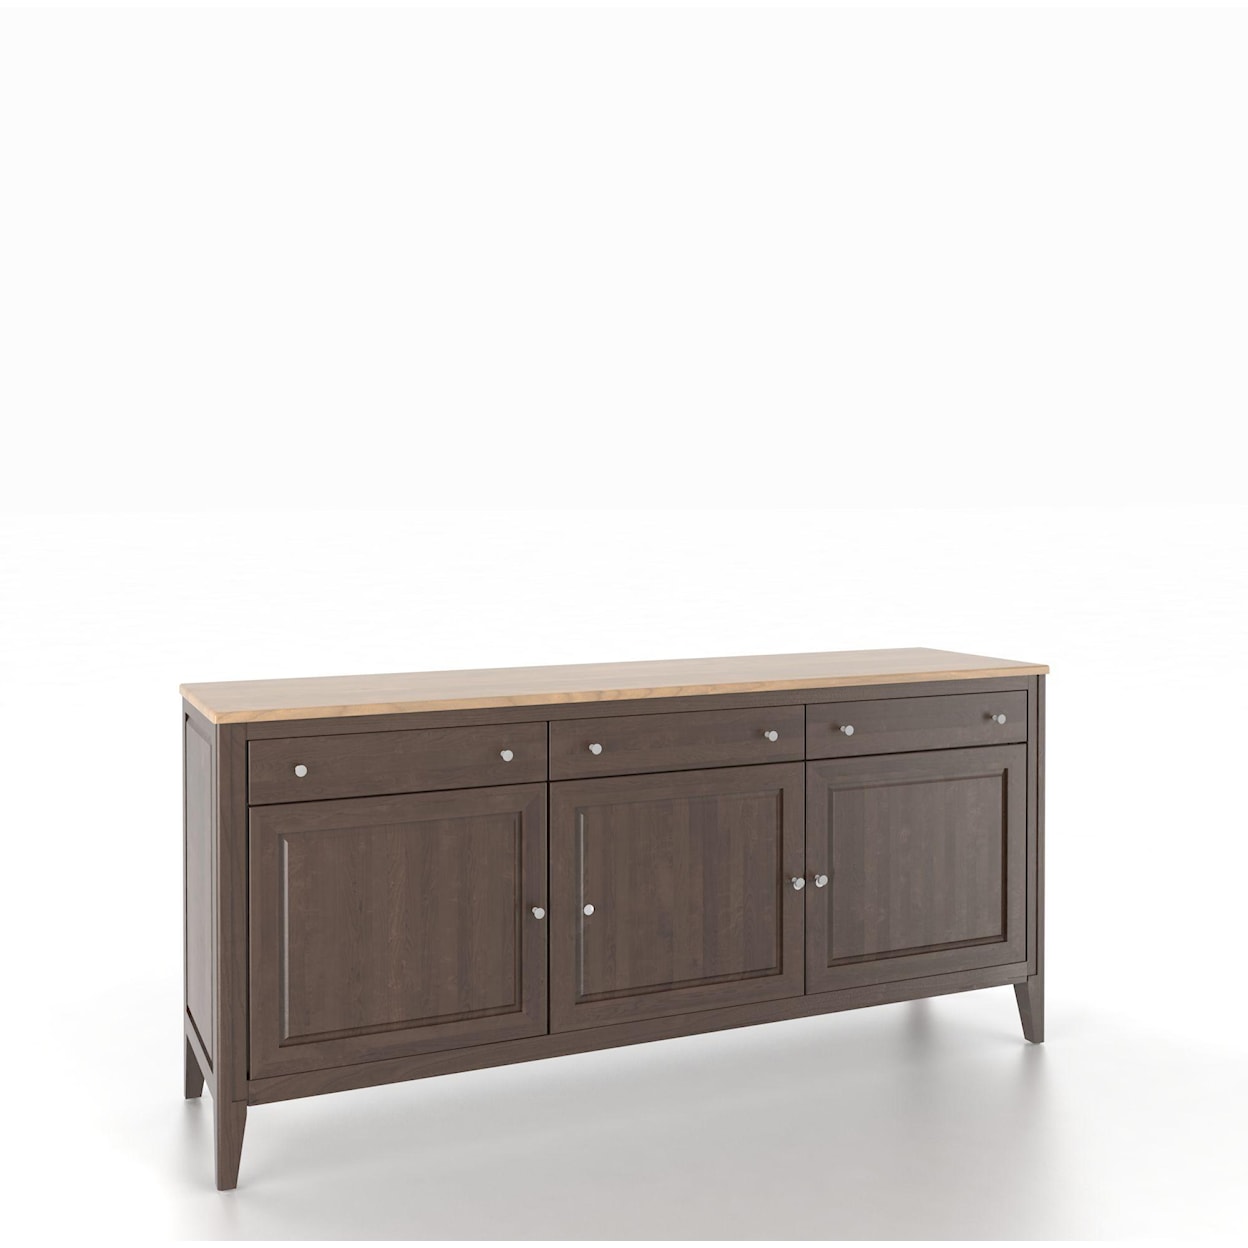 Canadel Canadel Customizable 72 Inch Buffet